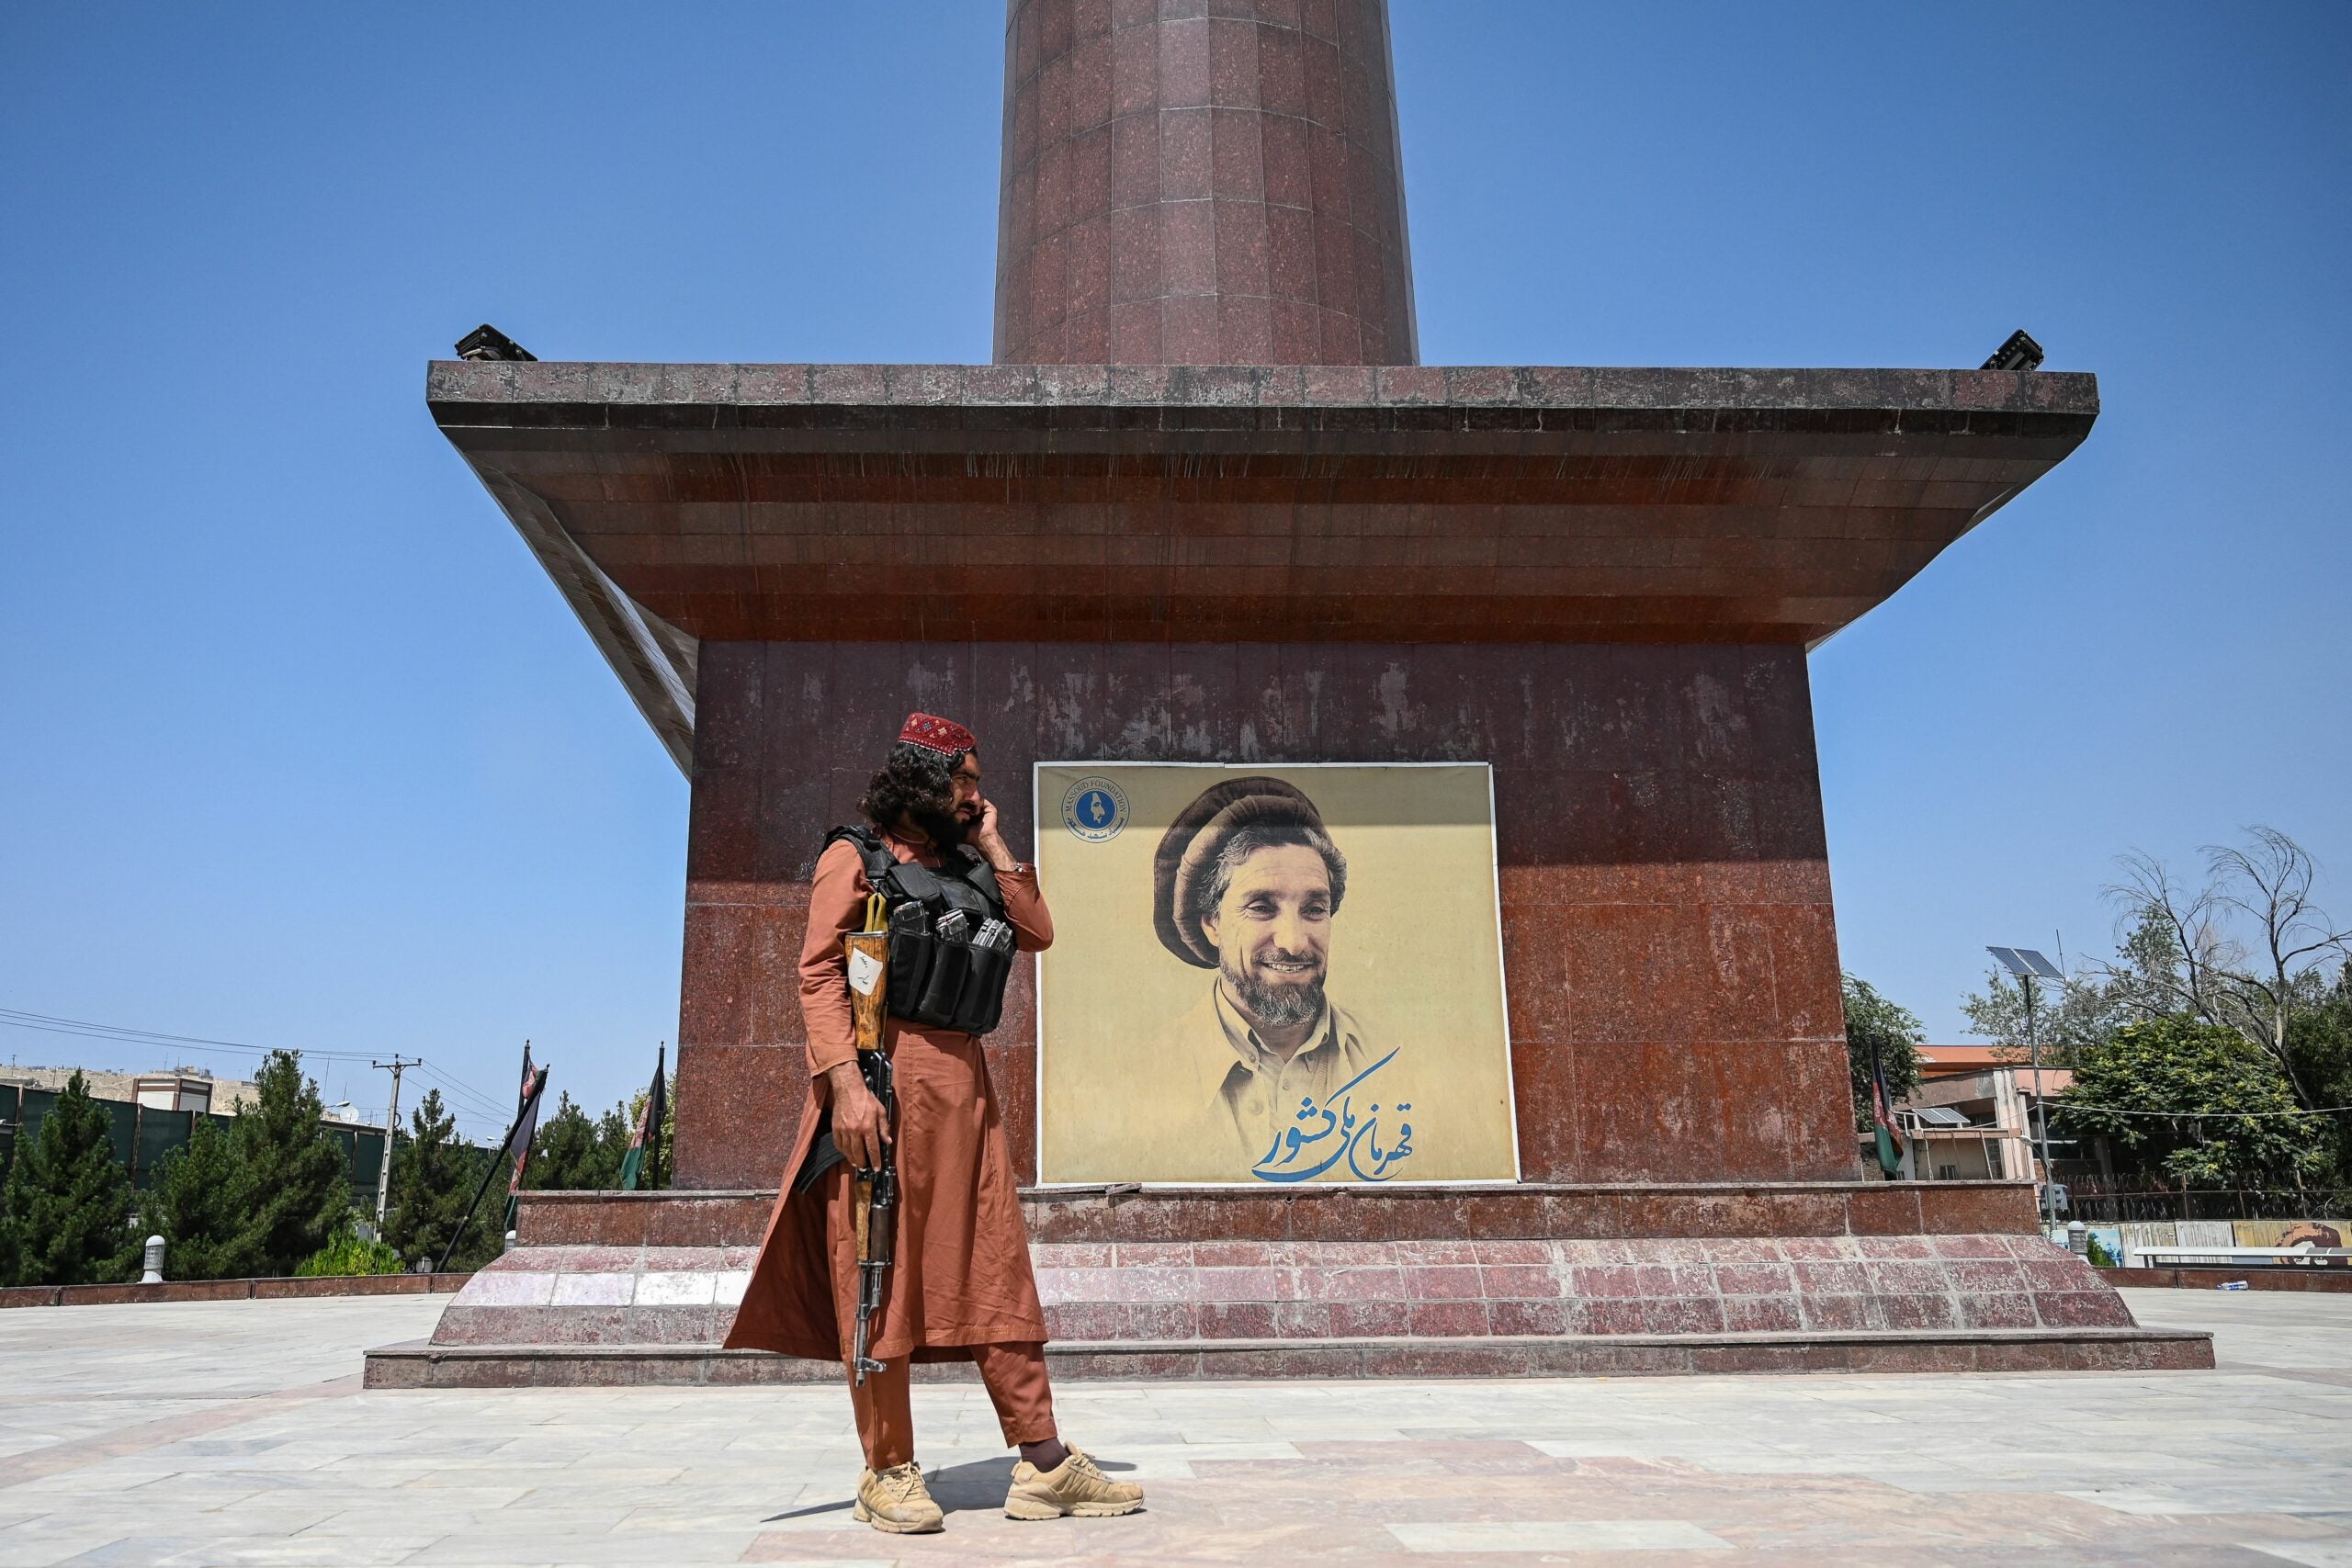 A Taliban fighter stand next to poster bearing the image late Afghan commander Ahmad Shah Massoud at the Massoud Square in Kabul on August 16, 2021. (Photo by Wakil Kohsar / AFP) (Photo by WAKIL KOHSAR/AFP via Getty Images)